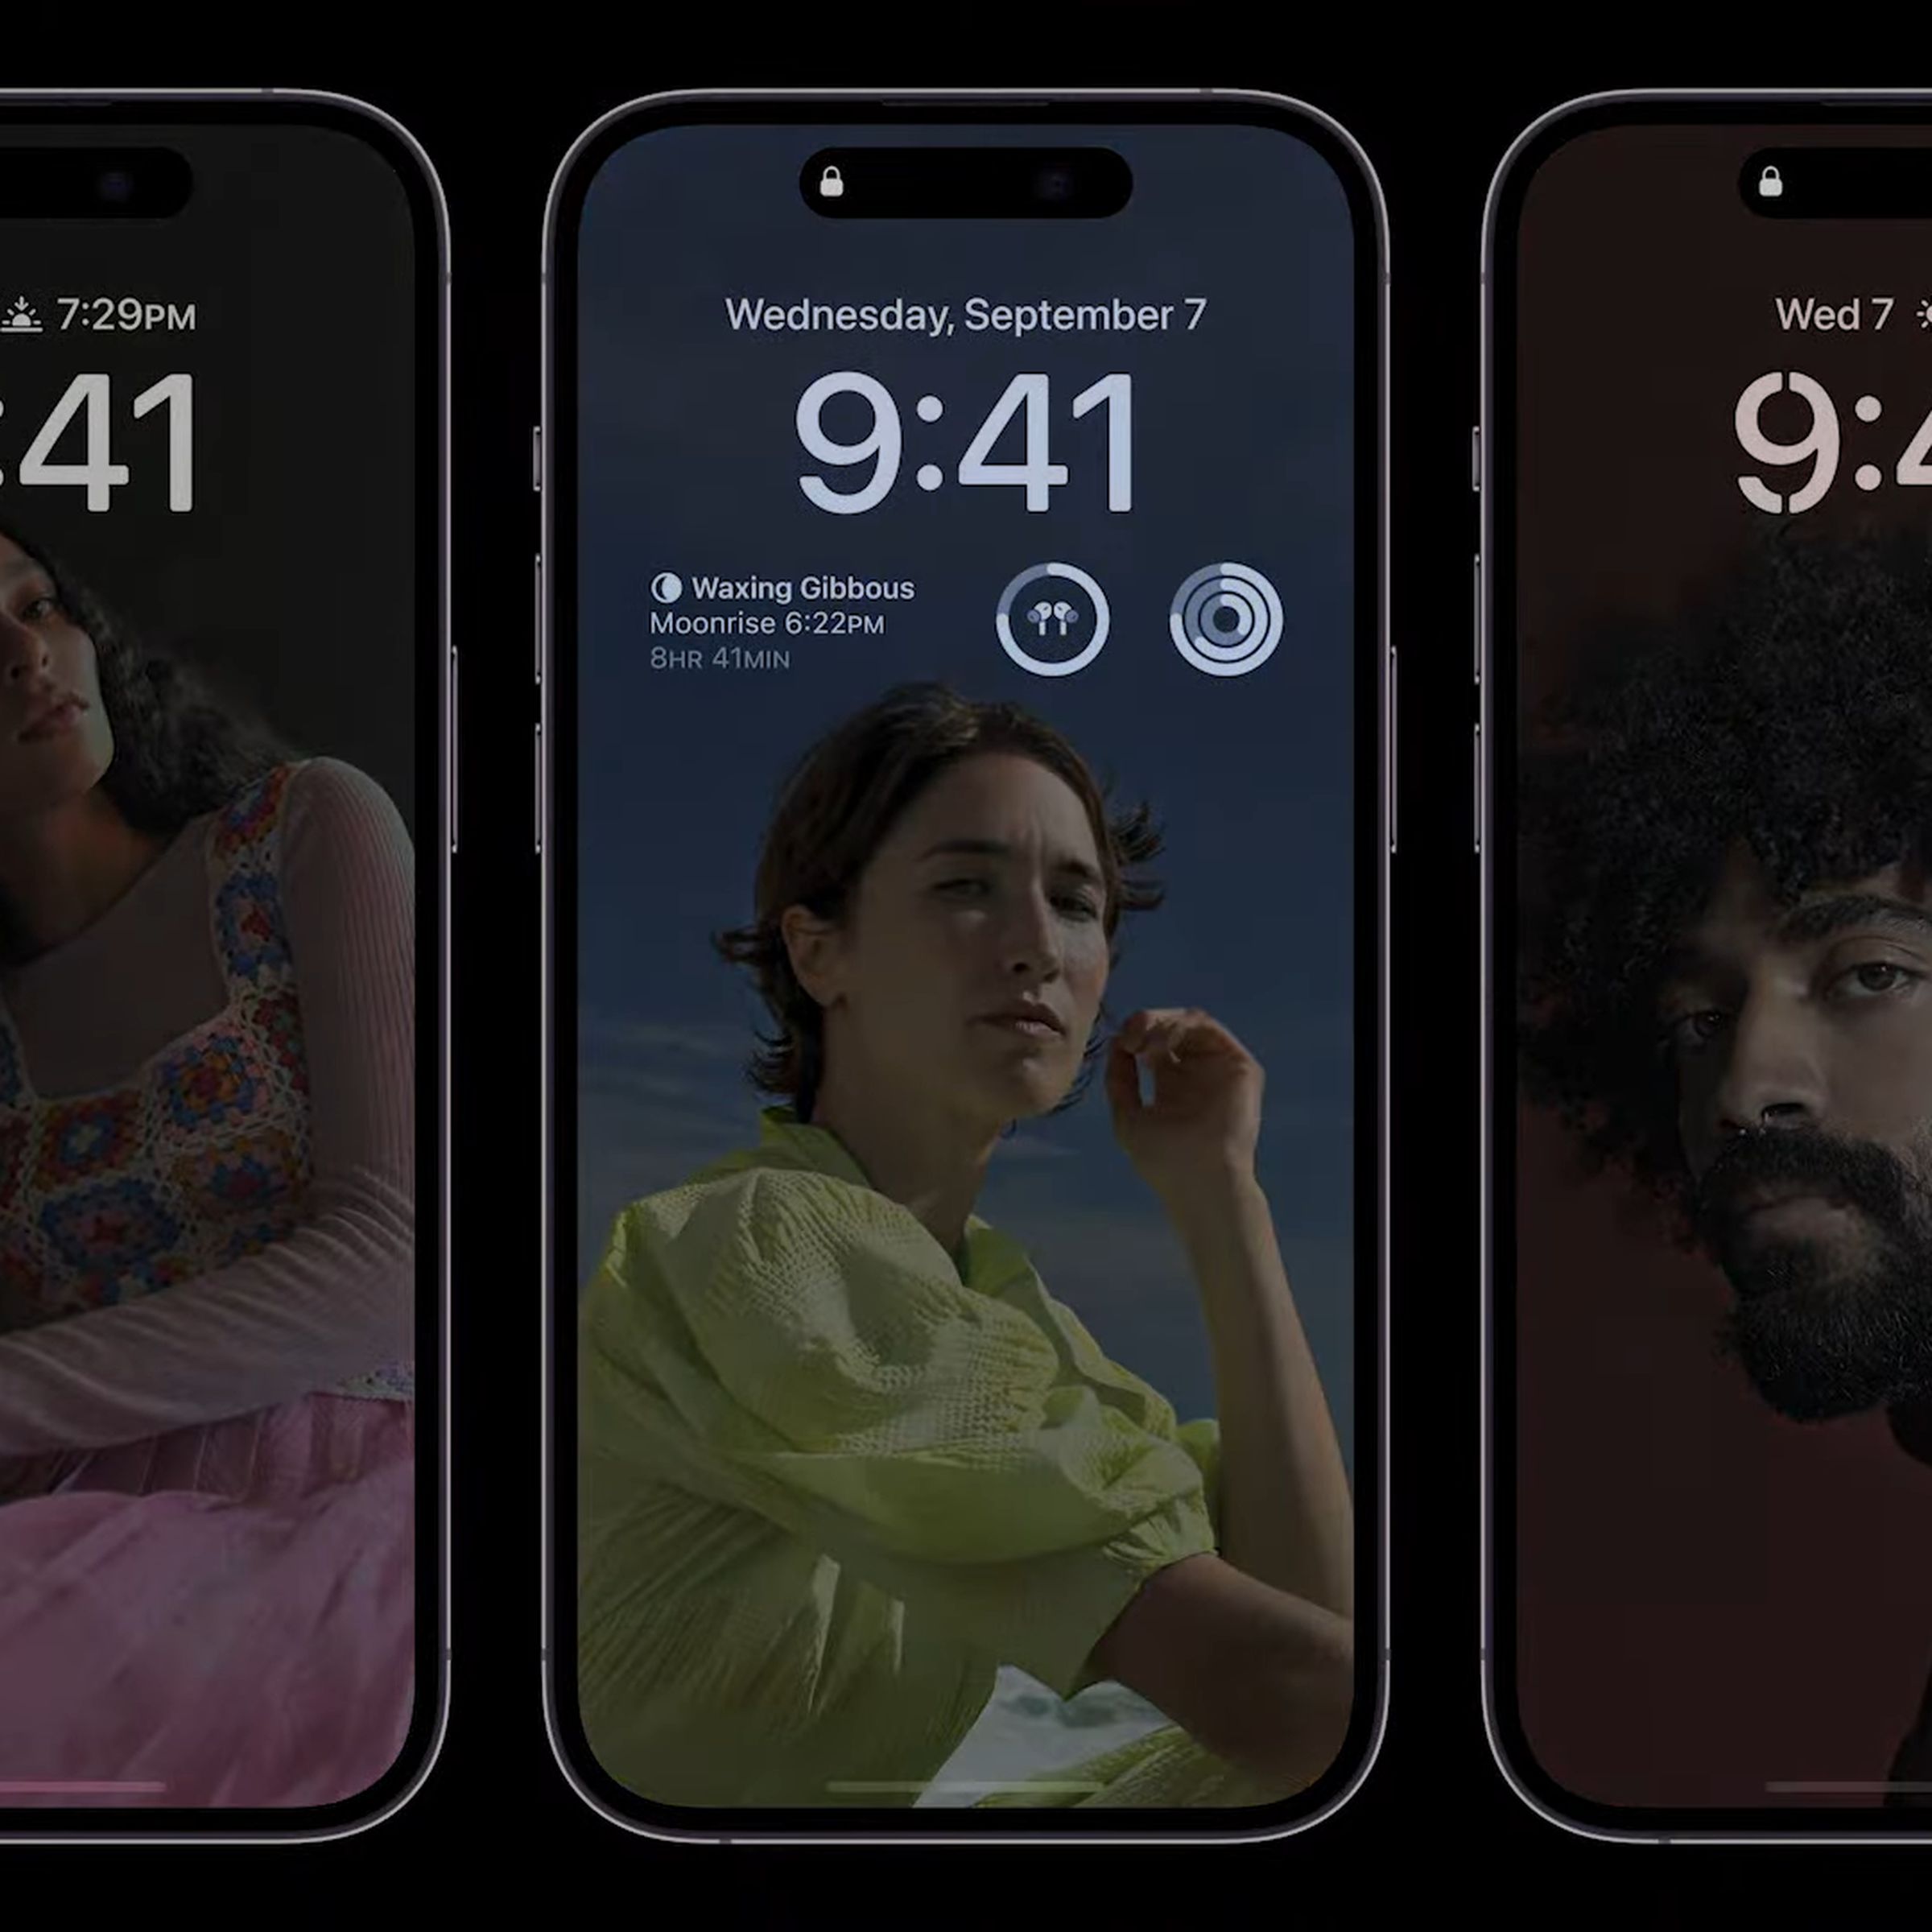 iPhone 14 Pro models side by side showcasing Apple’s new always-on display mode